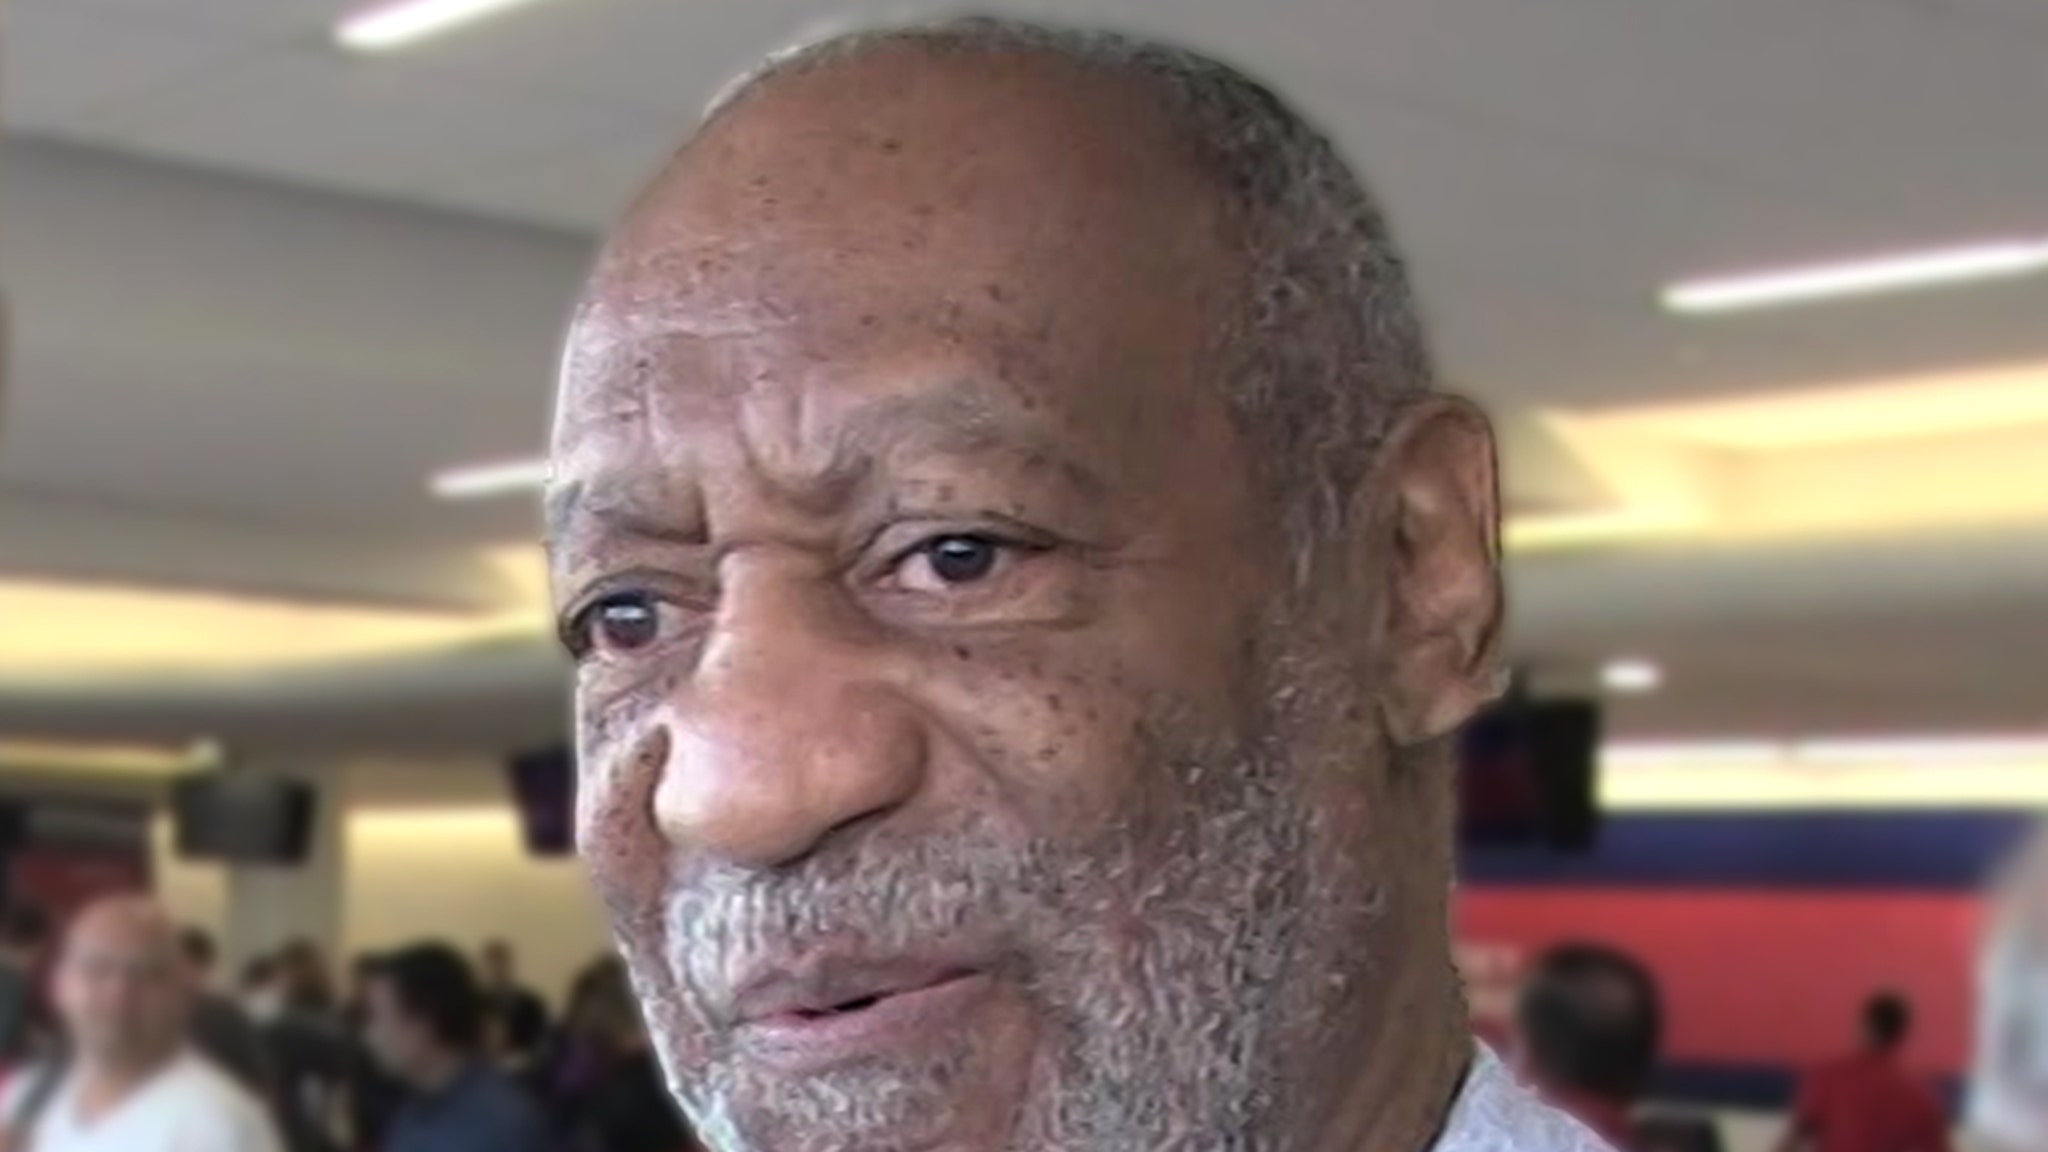 Bill Cosby sued by actress Joan Tarshis for alleged sexual assault